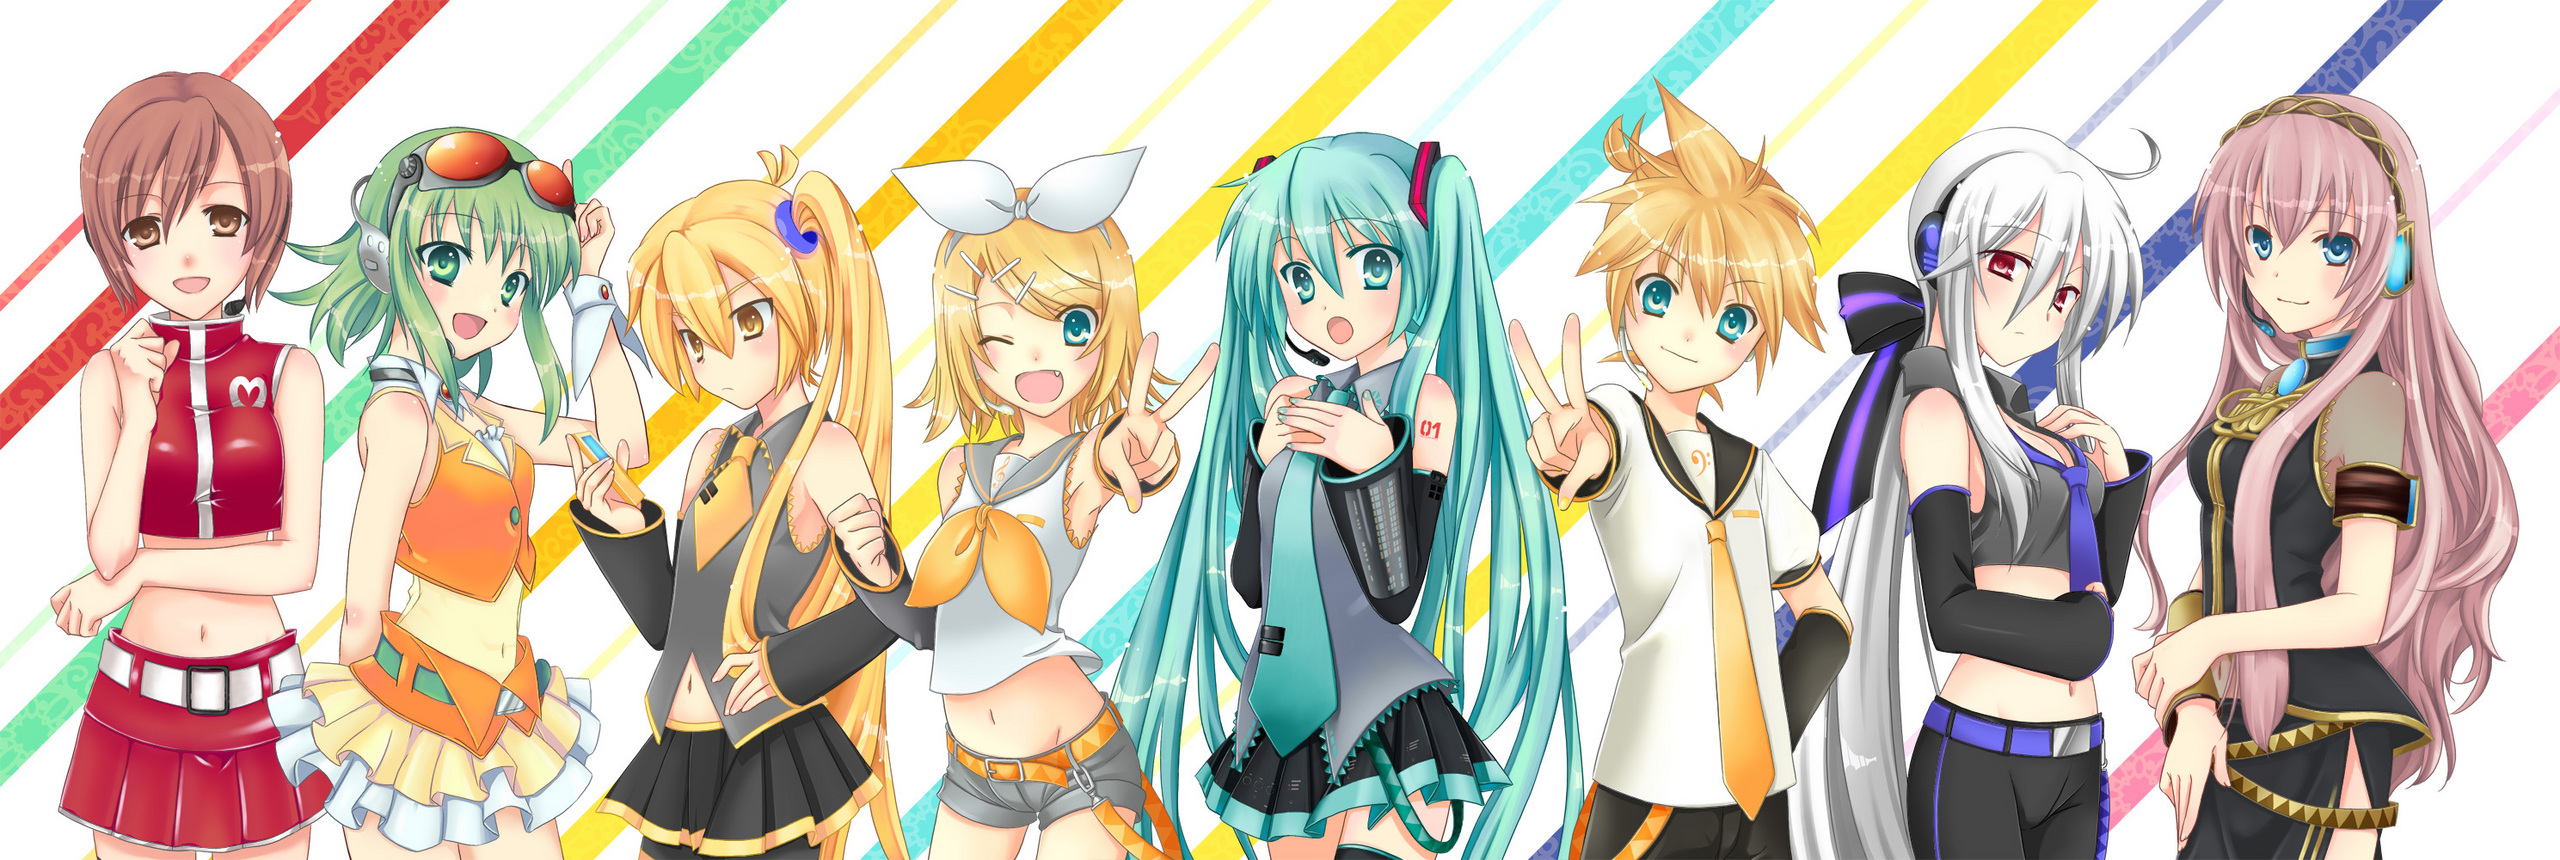 Nice wallpapers Vocaloid 2560x860px